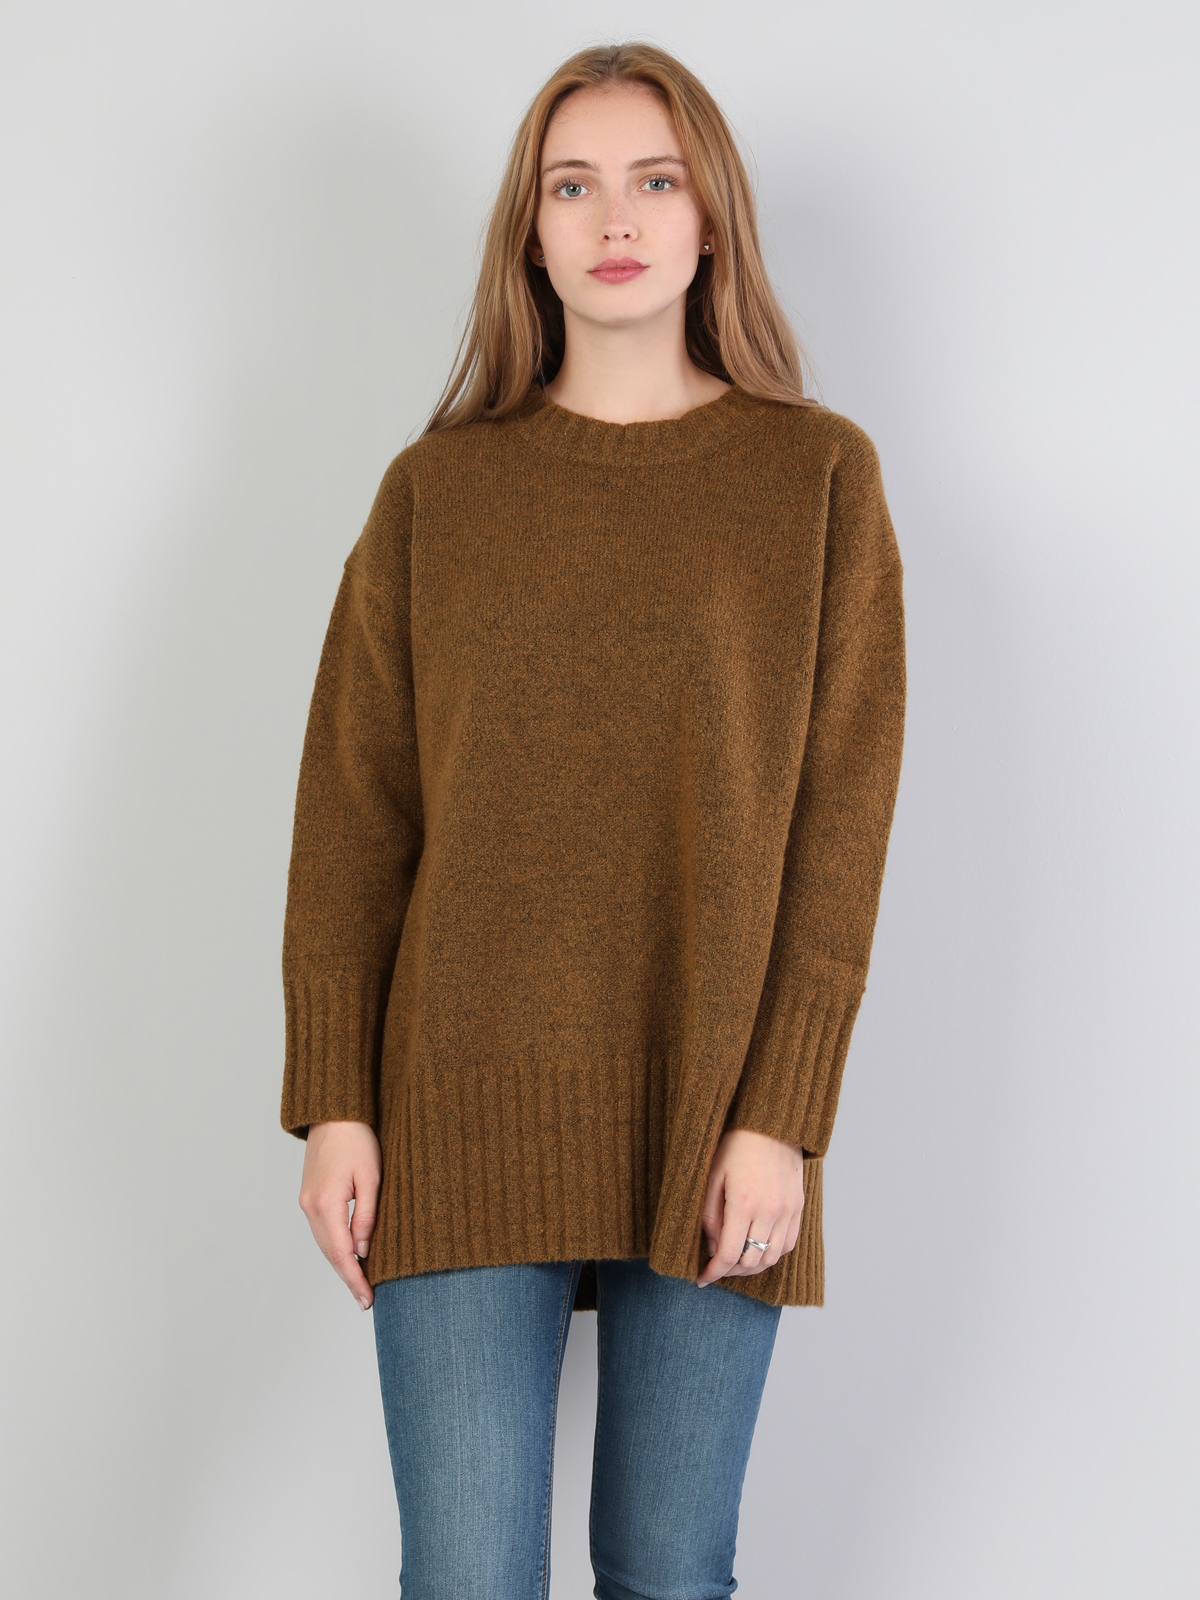 Colins Green Woman Sweaters. 4